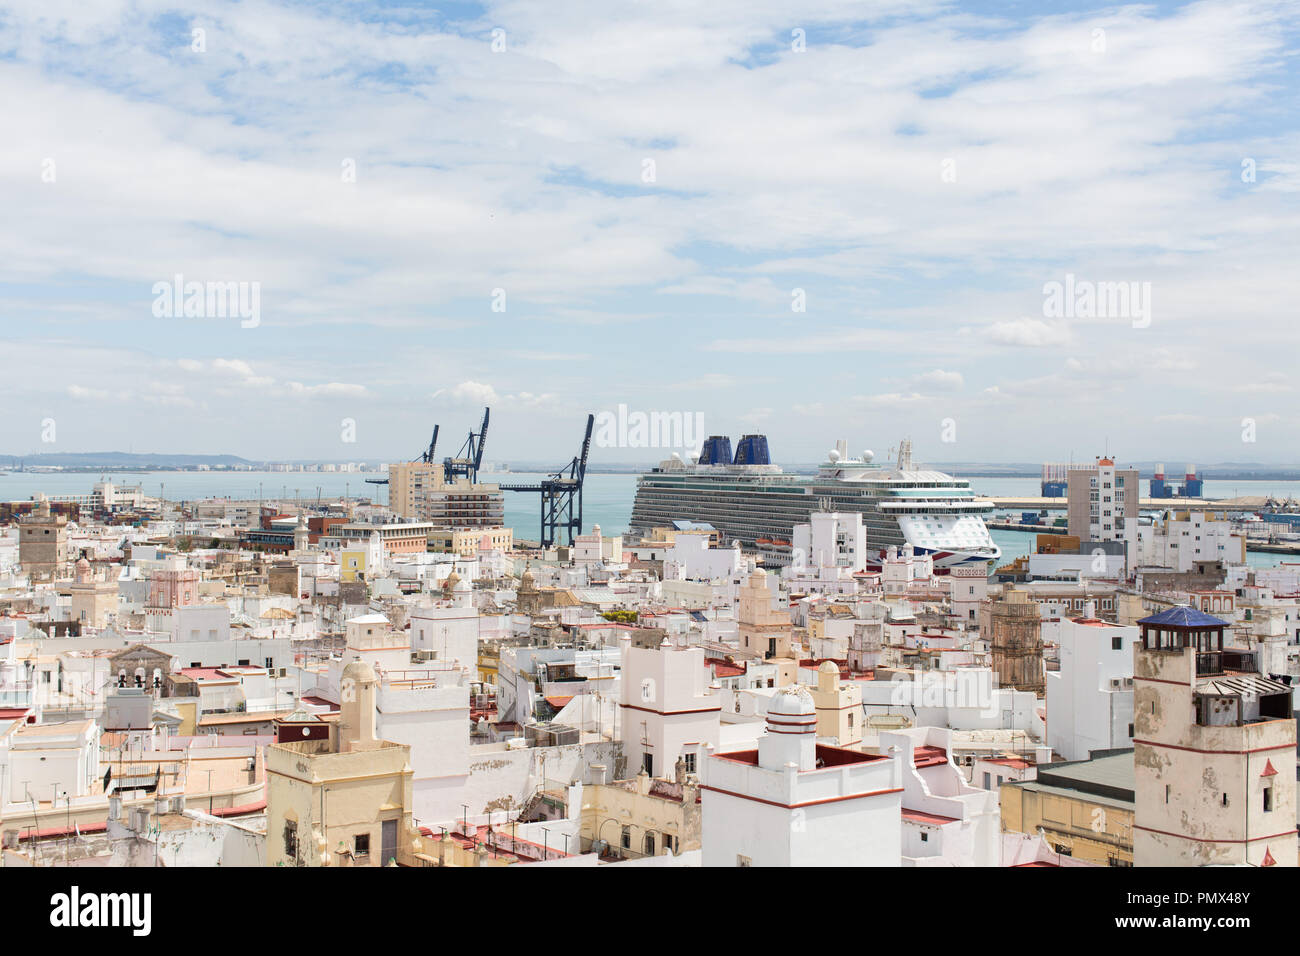 A view looking down on the rooftops of the city of Cadiz in Spain from the Tavira Tower (camera obscura) with a cruise ship in port in the distance Stock Photo